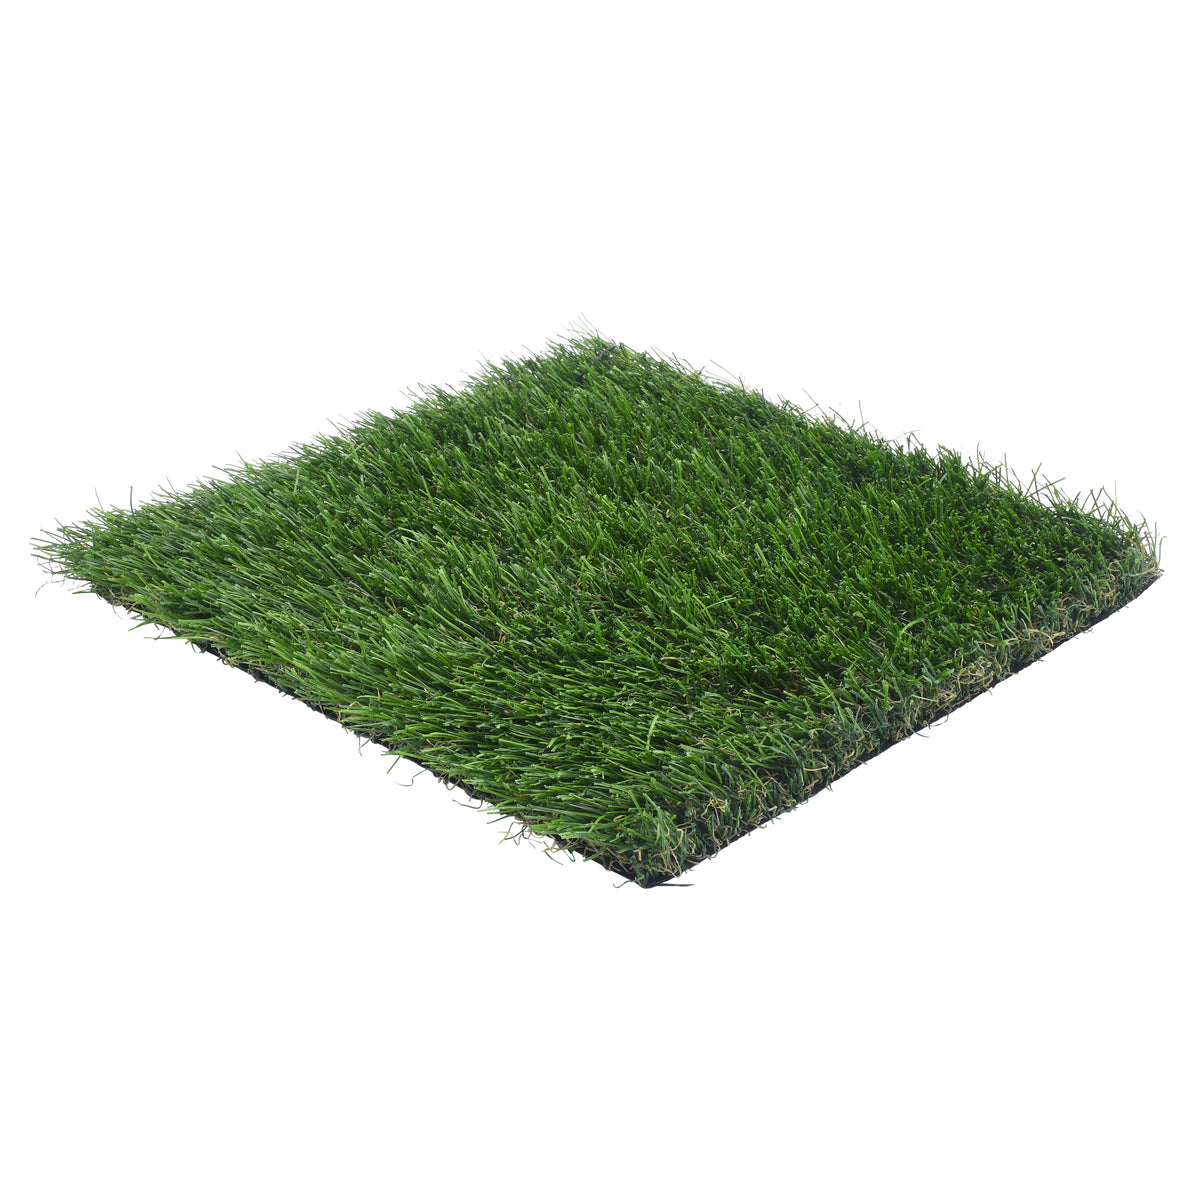 Play-Grass PlayStar Deluxe ($2.79 sqft)